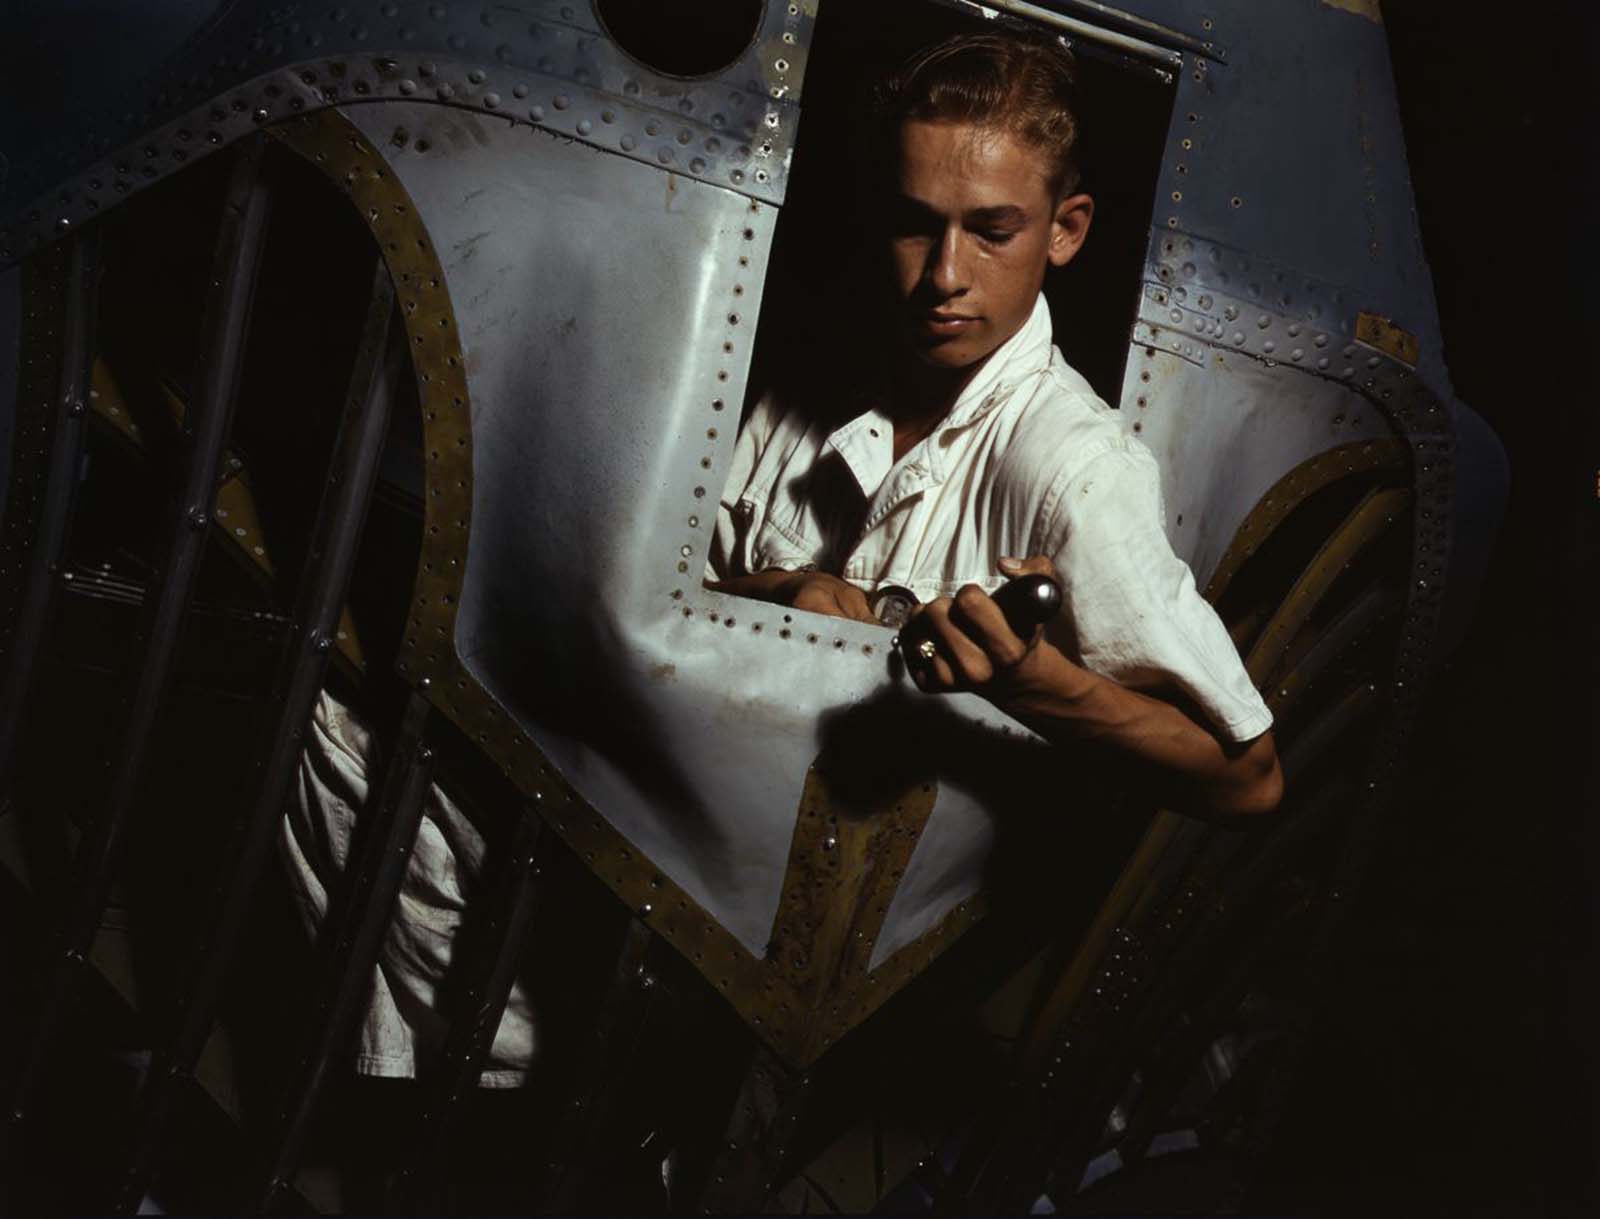 Working inside the nose of a PBY, Elmer J. Pace learns the construction of Navy planes.